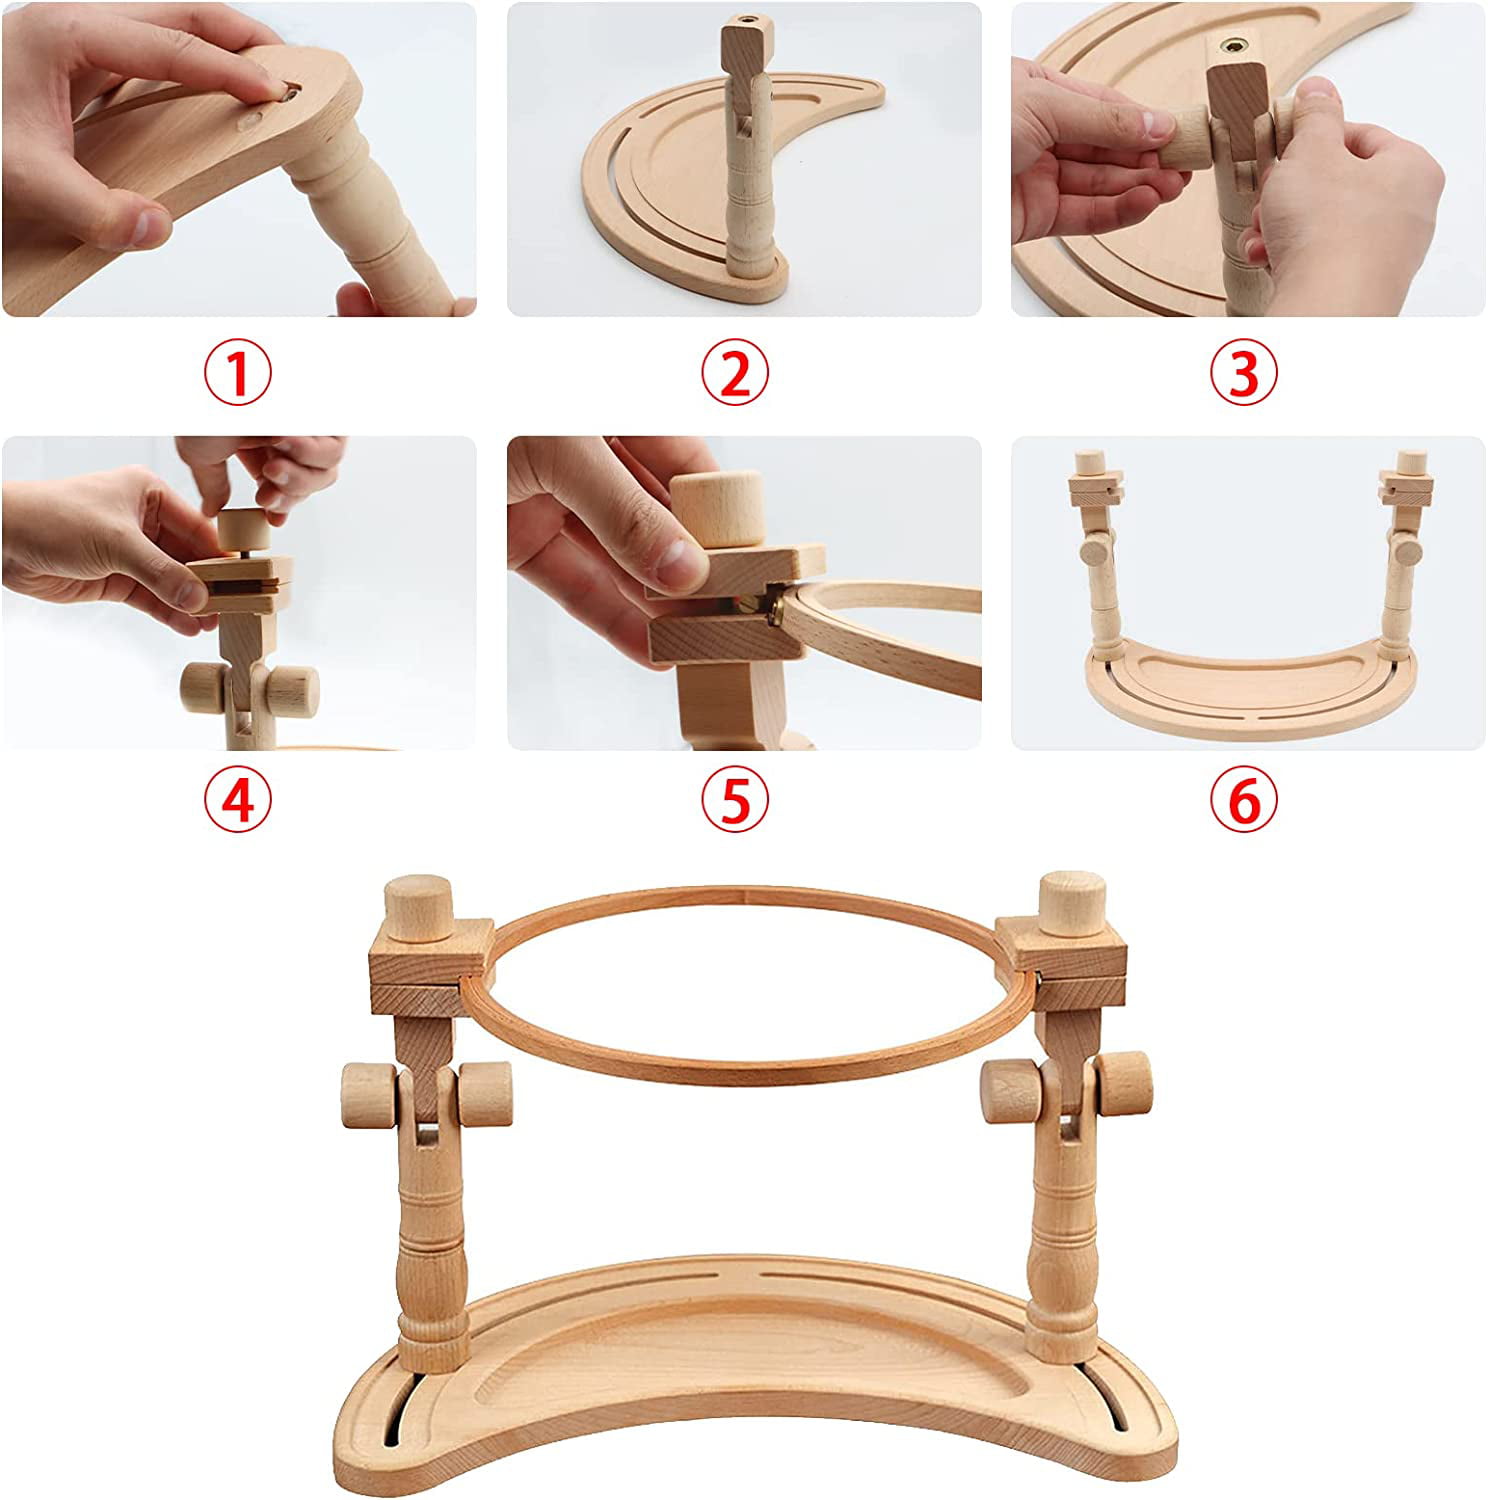 Adjustable Embroidery Hoop Stand,Hands Free Beech Wood Embroidery Hoop  Holder Frame, with 4 Bead Trays, Rotated Needlepoint Holder Stand, for  Cross